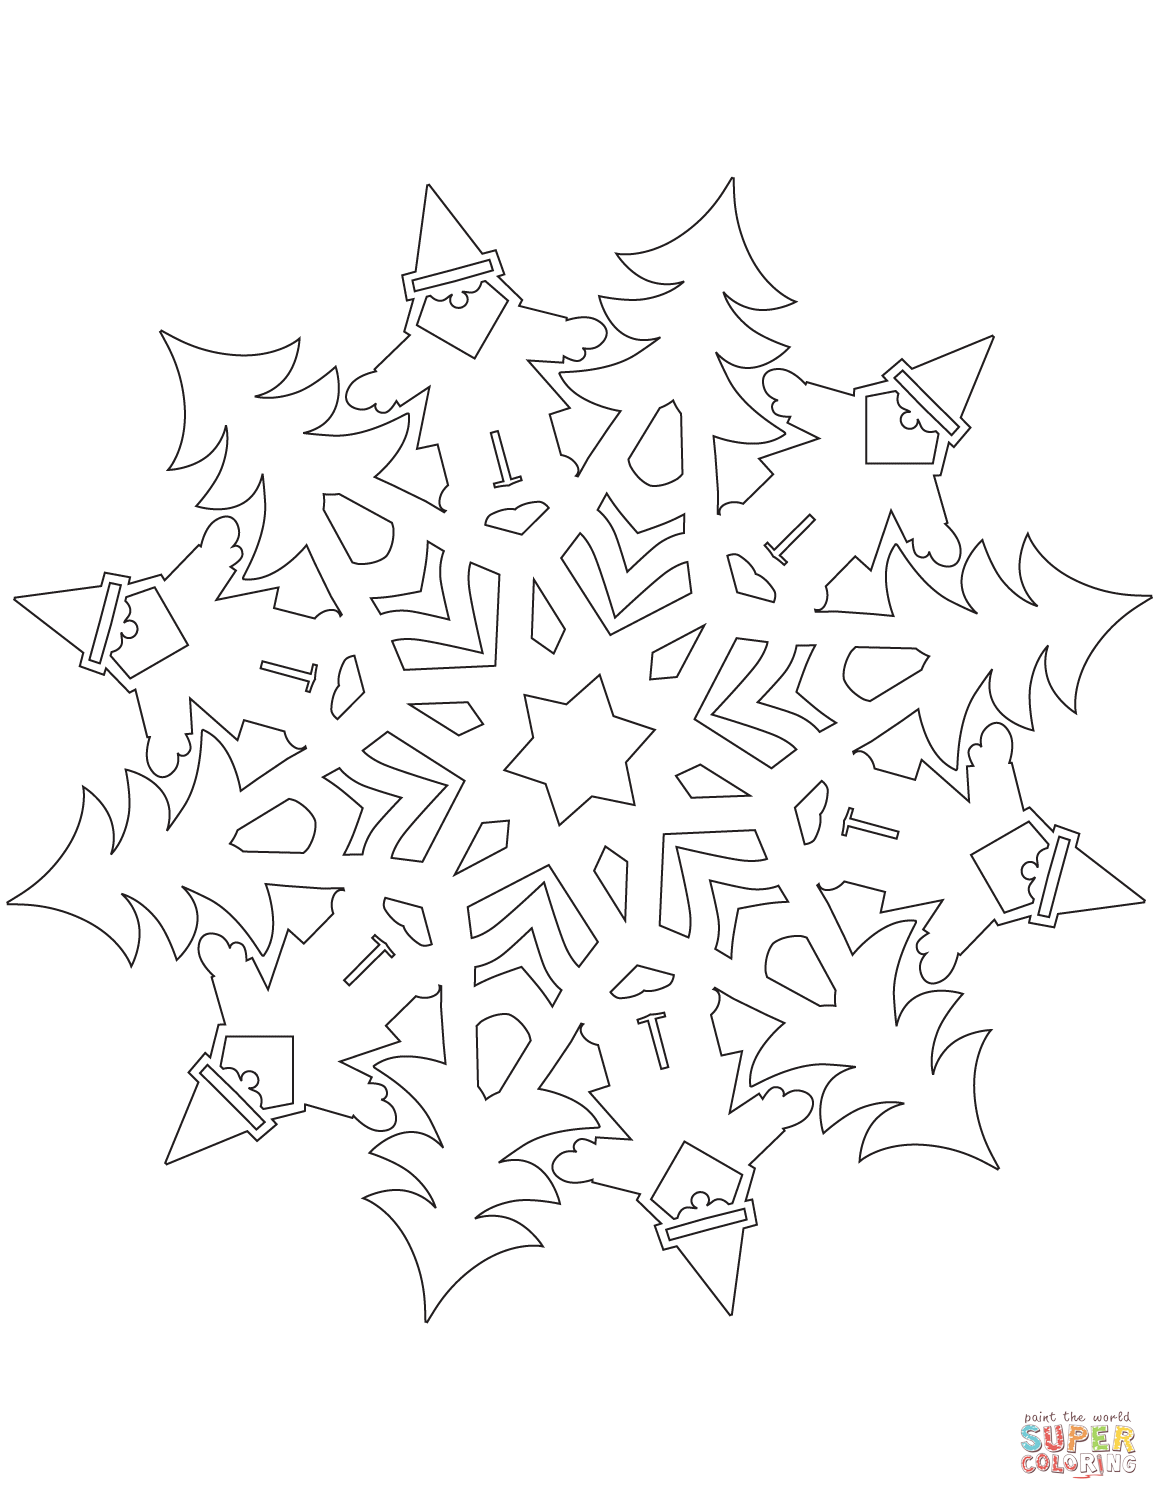 Snowflake with santa claus coloring page free printable coloring pages